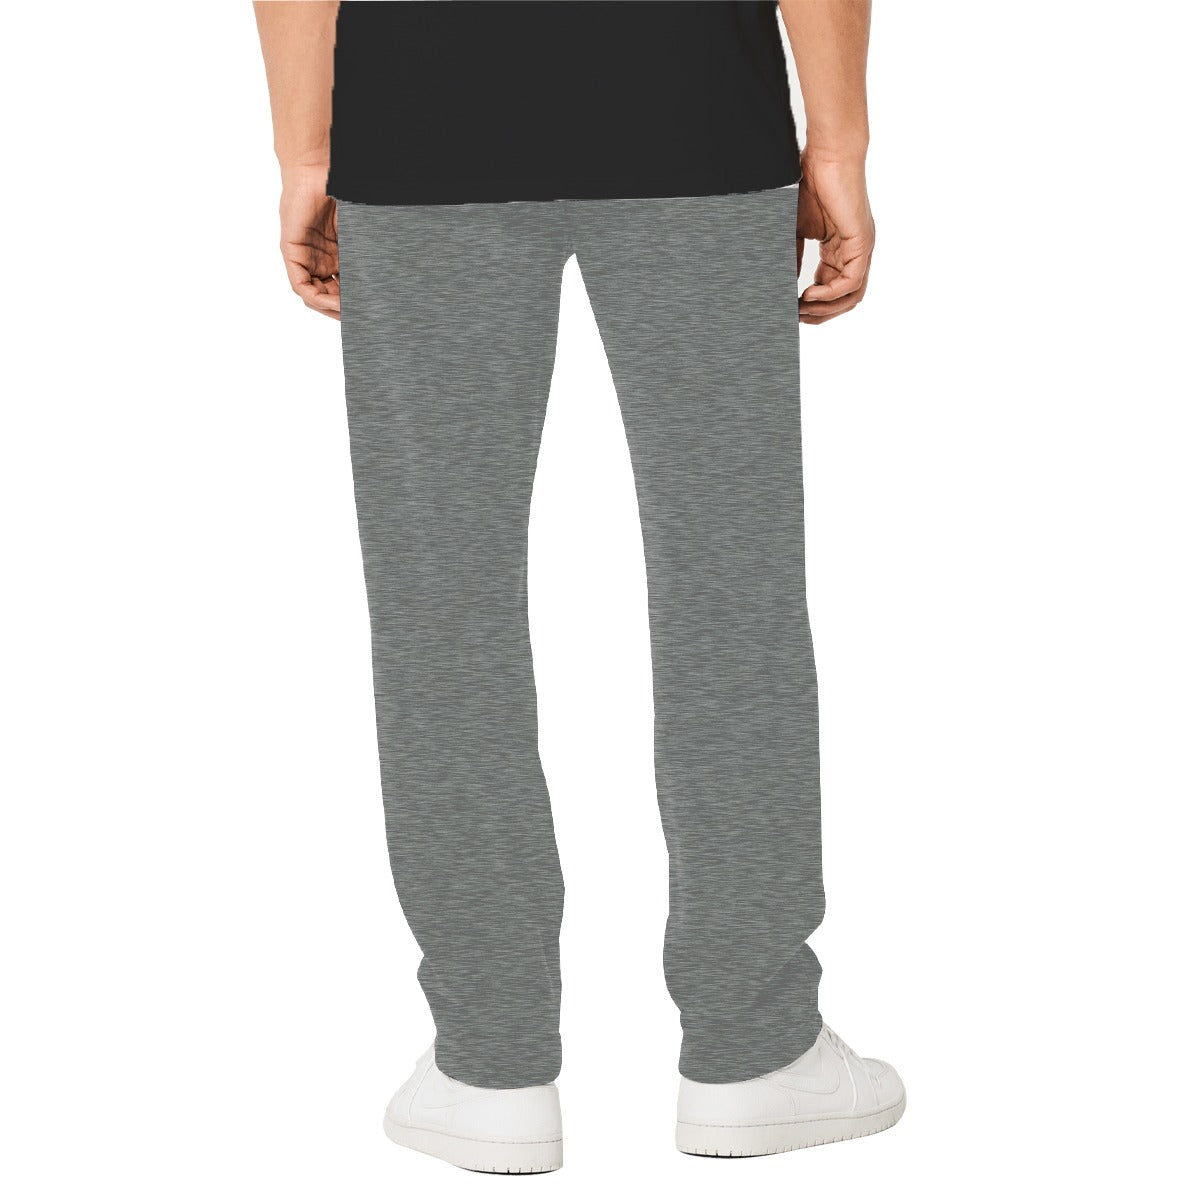 SIGNATURE EMBROIDERED SWEAT PANT